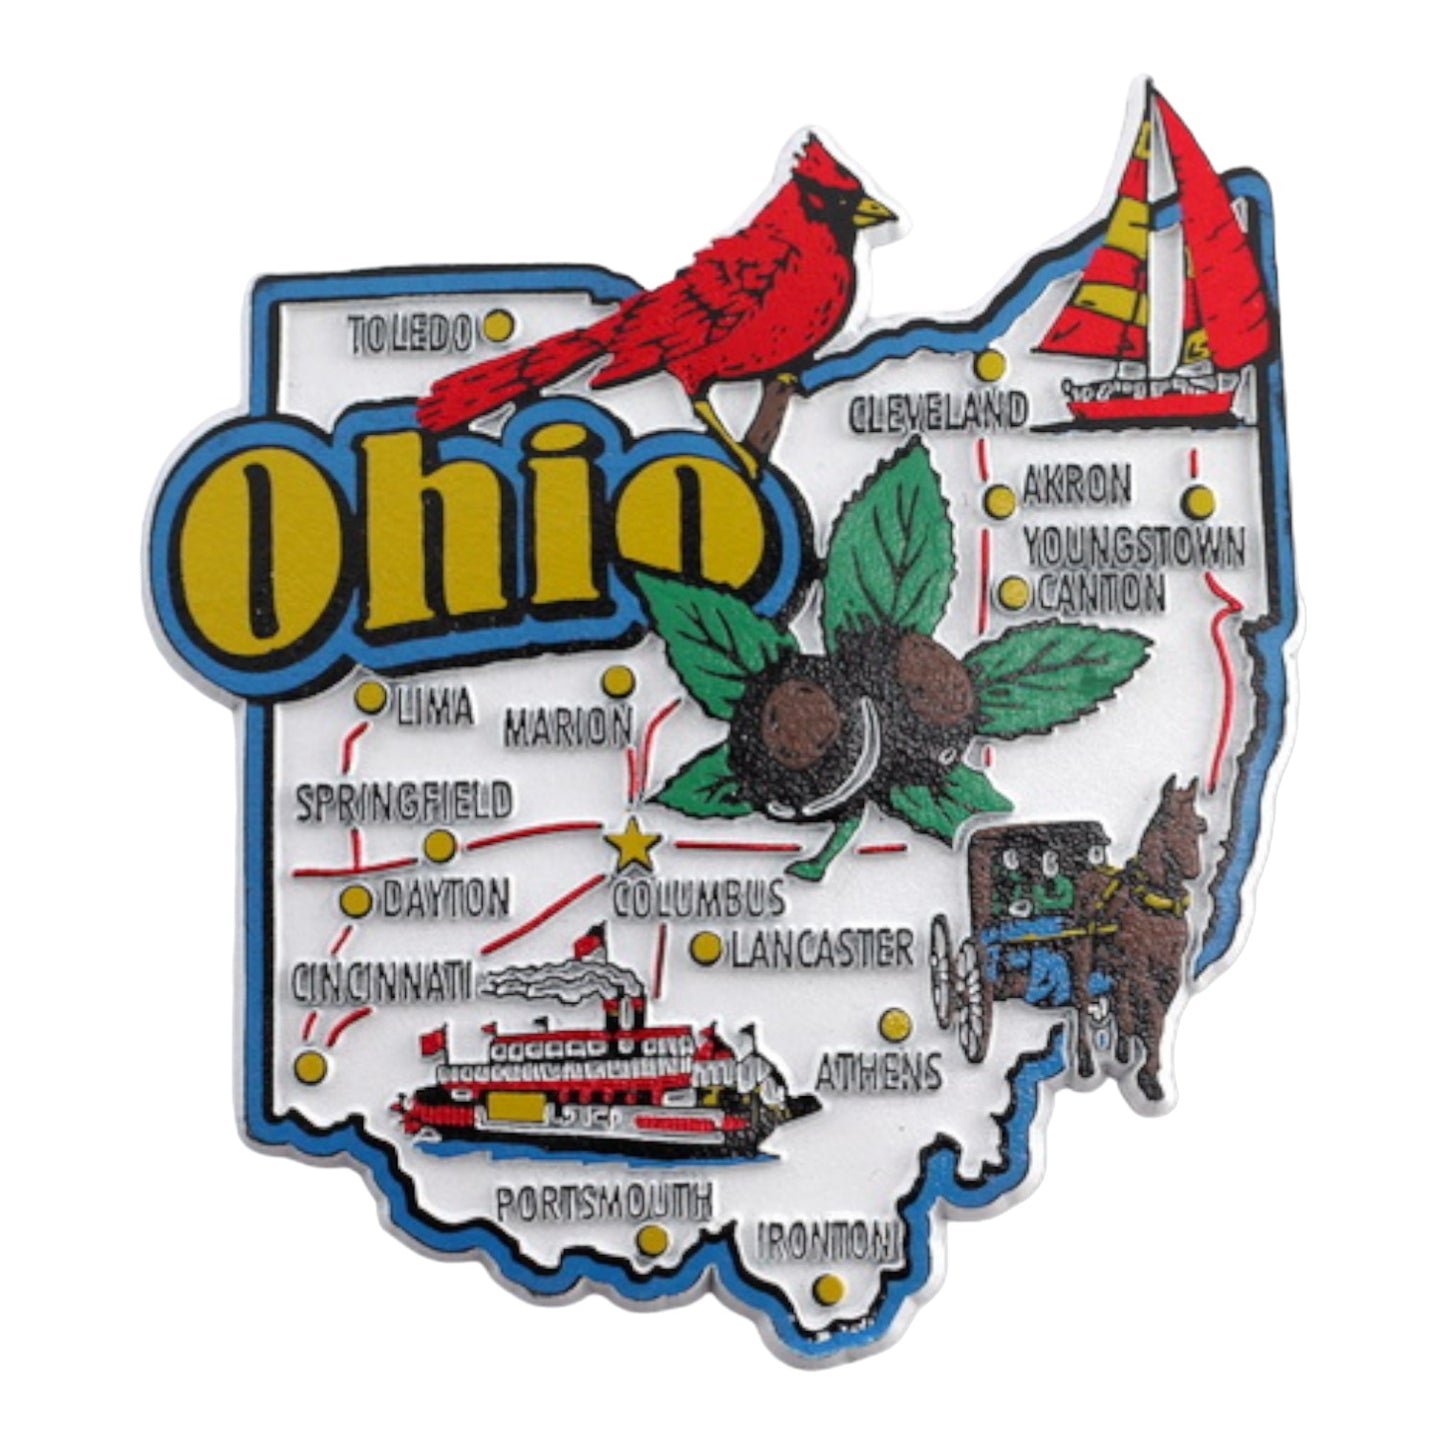 Ohio State Map and Landmarks Collage Fridge Souvenir Collectible Magnet